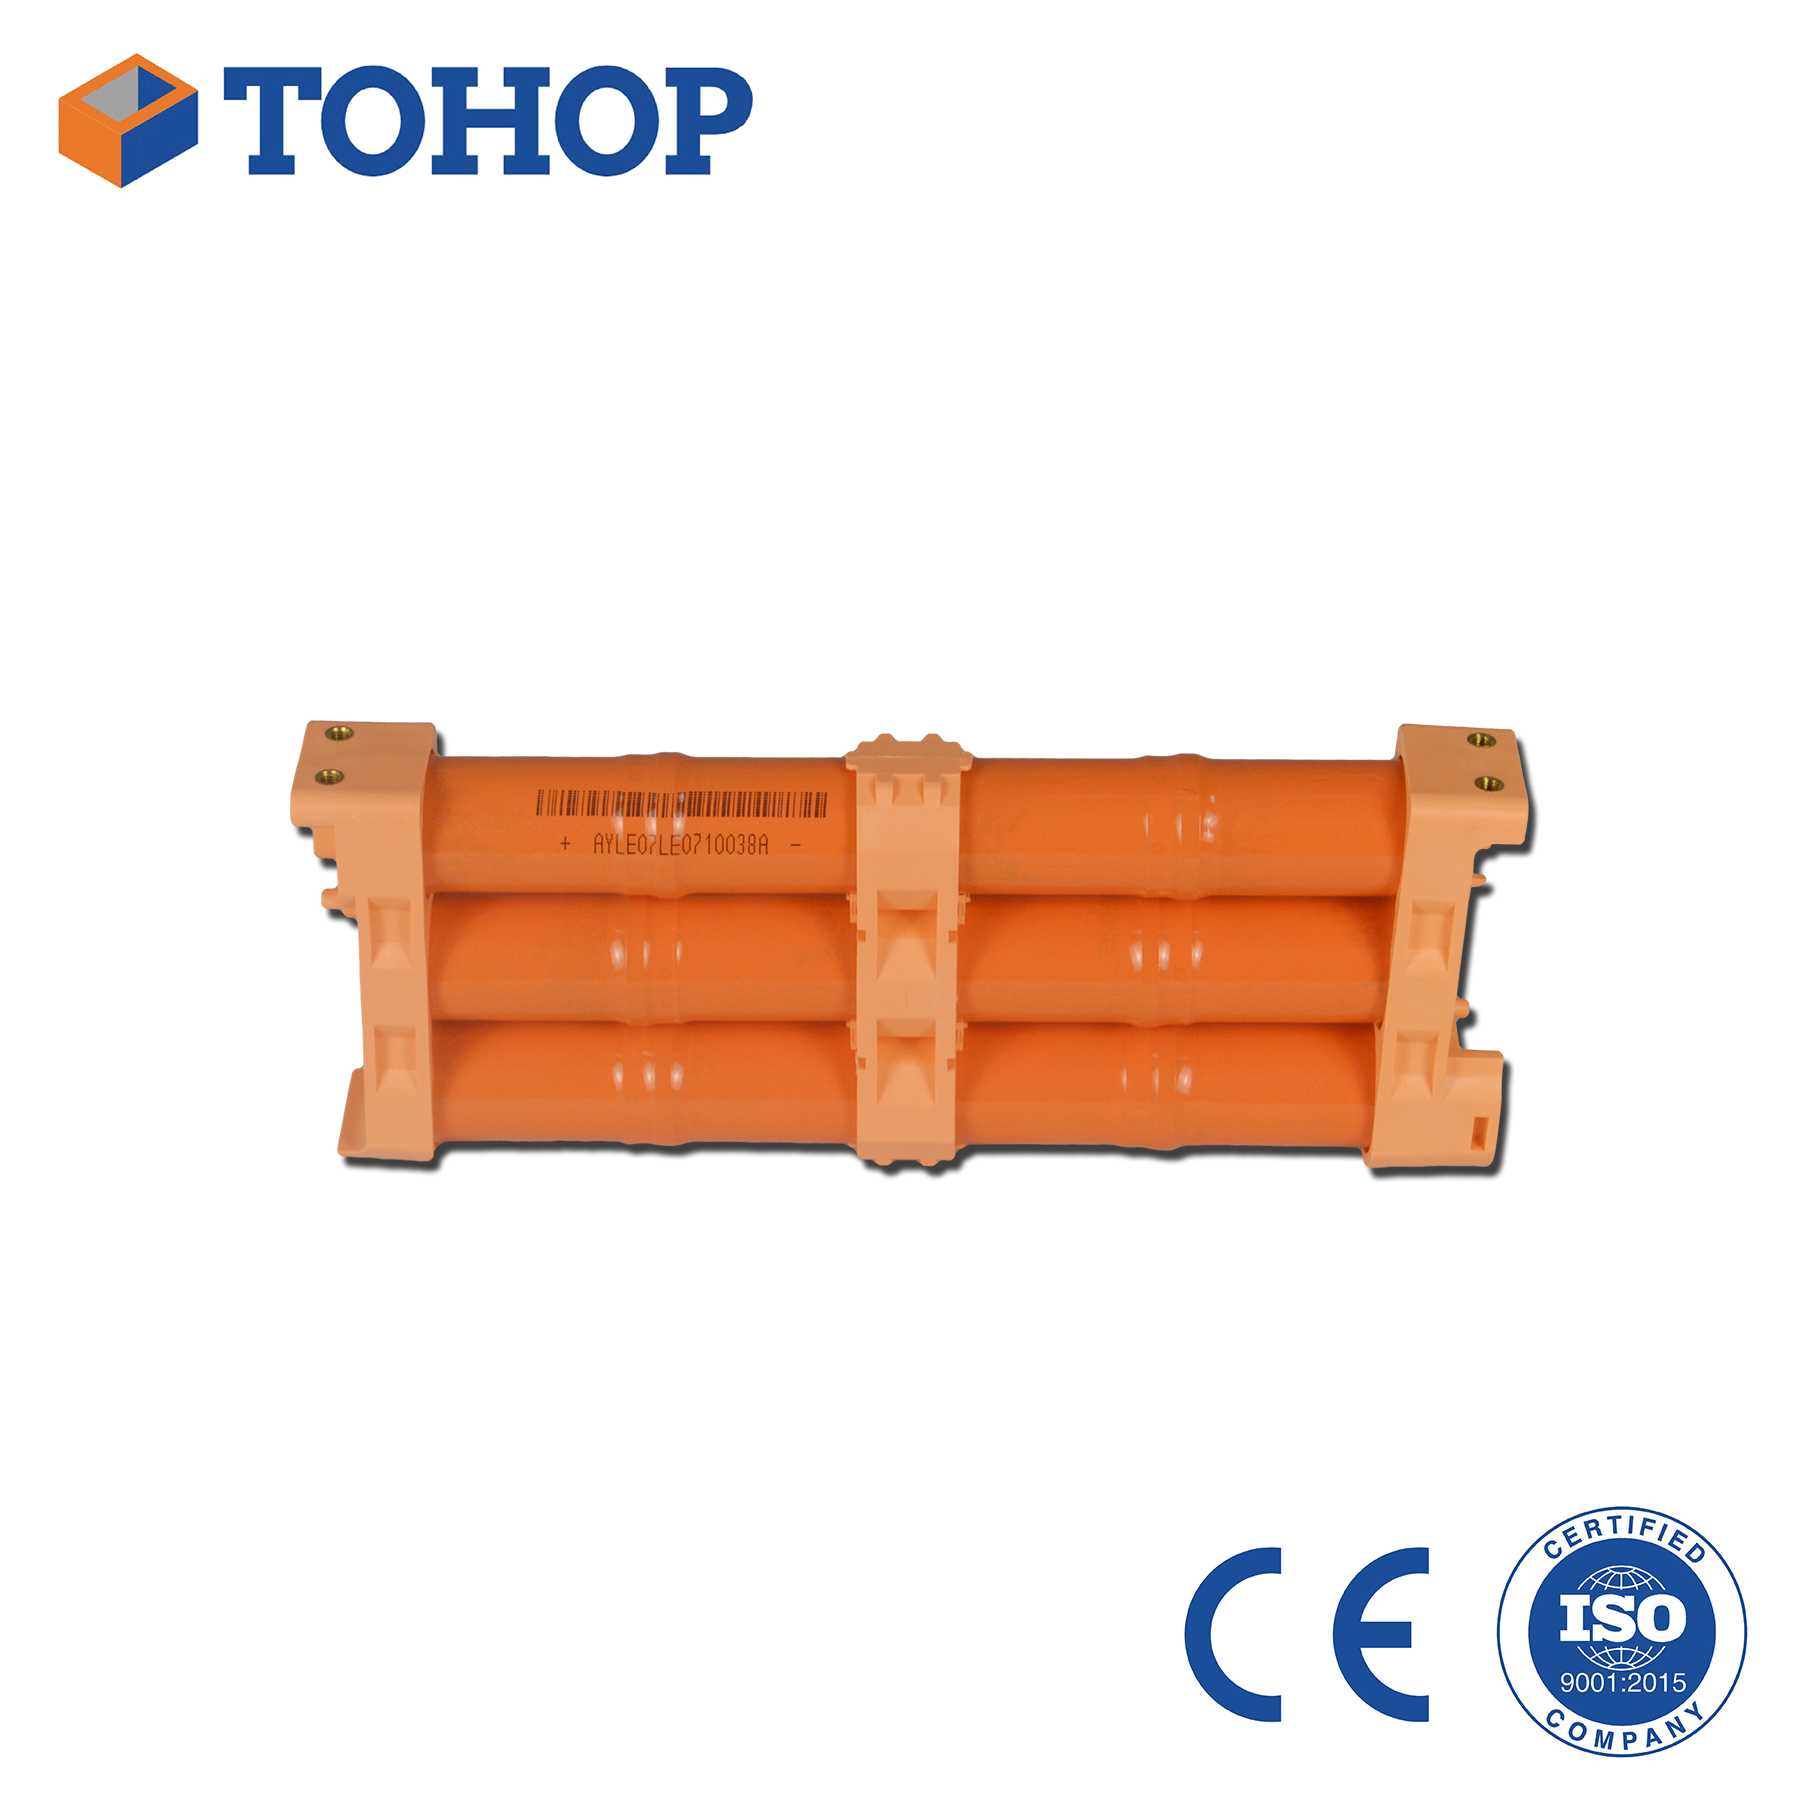 Toyota Camry XV40 2008 Cylindrical TOHOP Hybrid Battery for Car